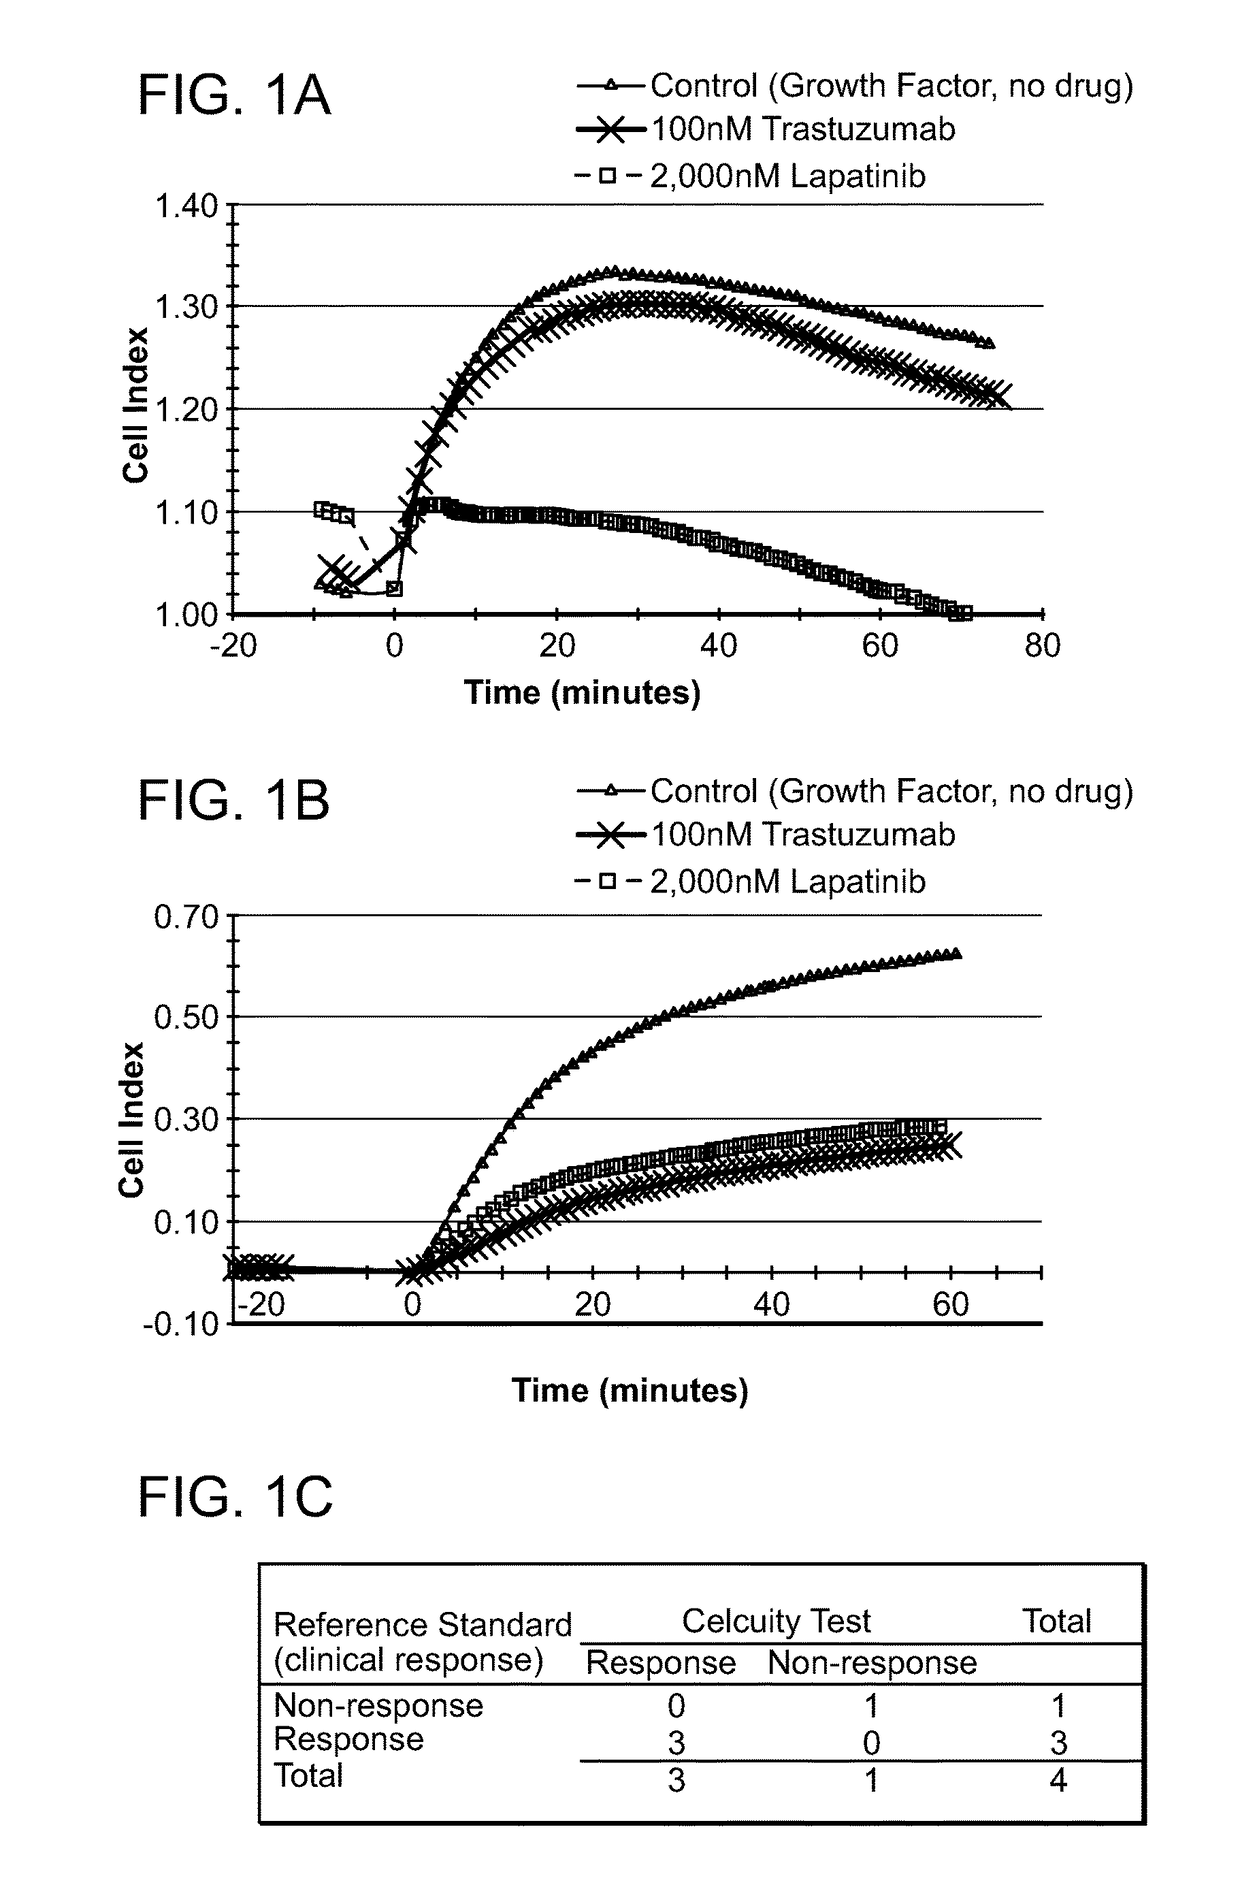 Methods of measuring erbb signaling pathway activity to diagnose and treat cancer patients